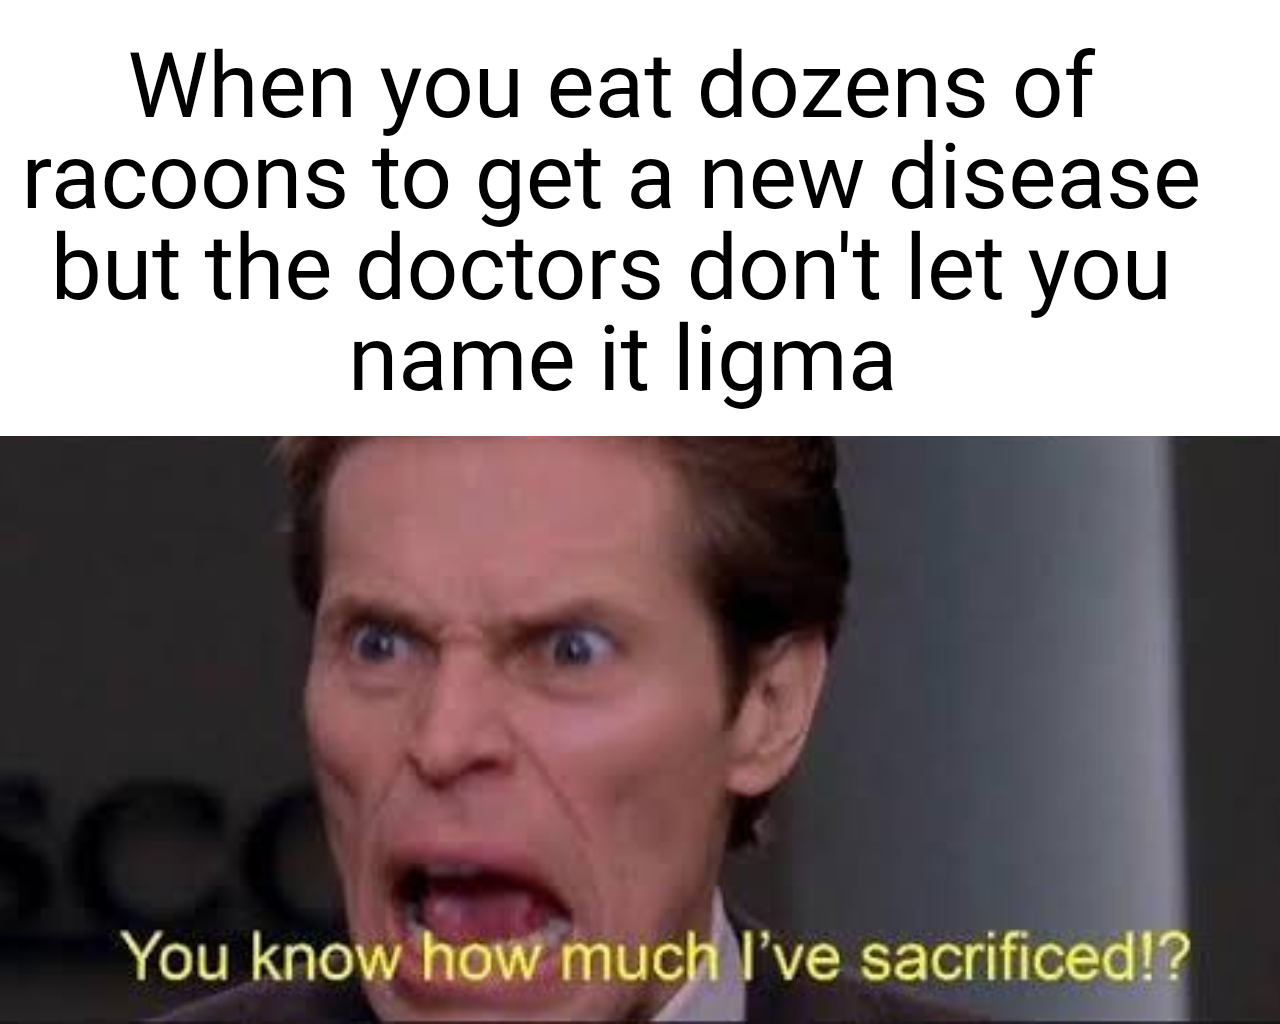 photo caption - When you eat dozens of racoons to get a new disease but the doctors don't let you name it ligma You know how much I've sacrificed!?